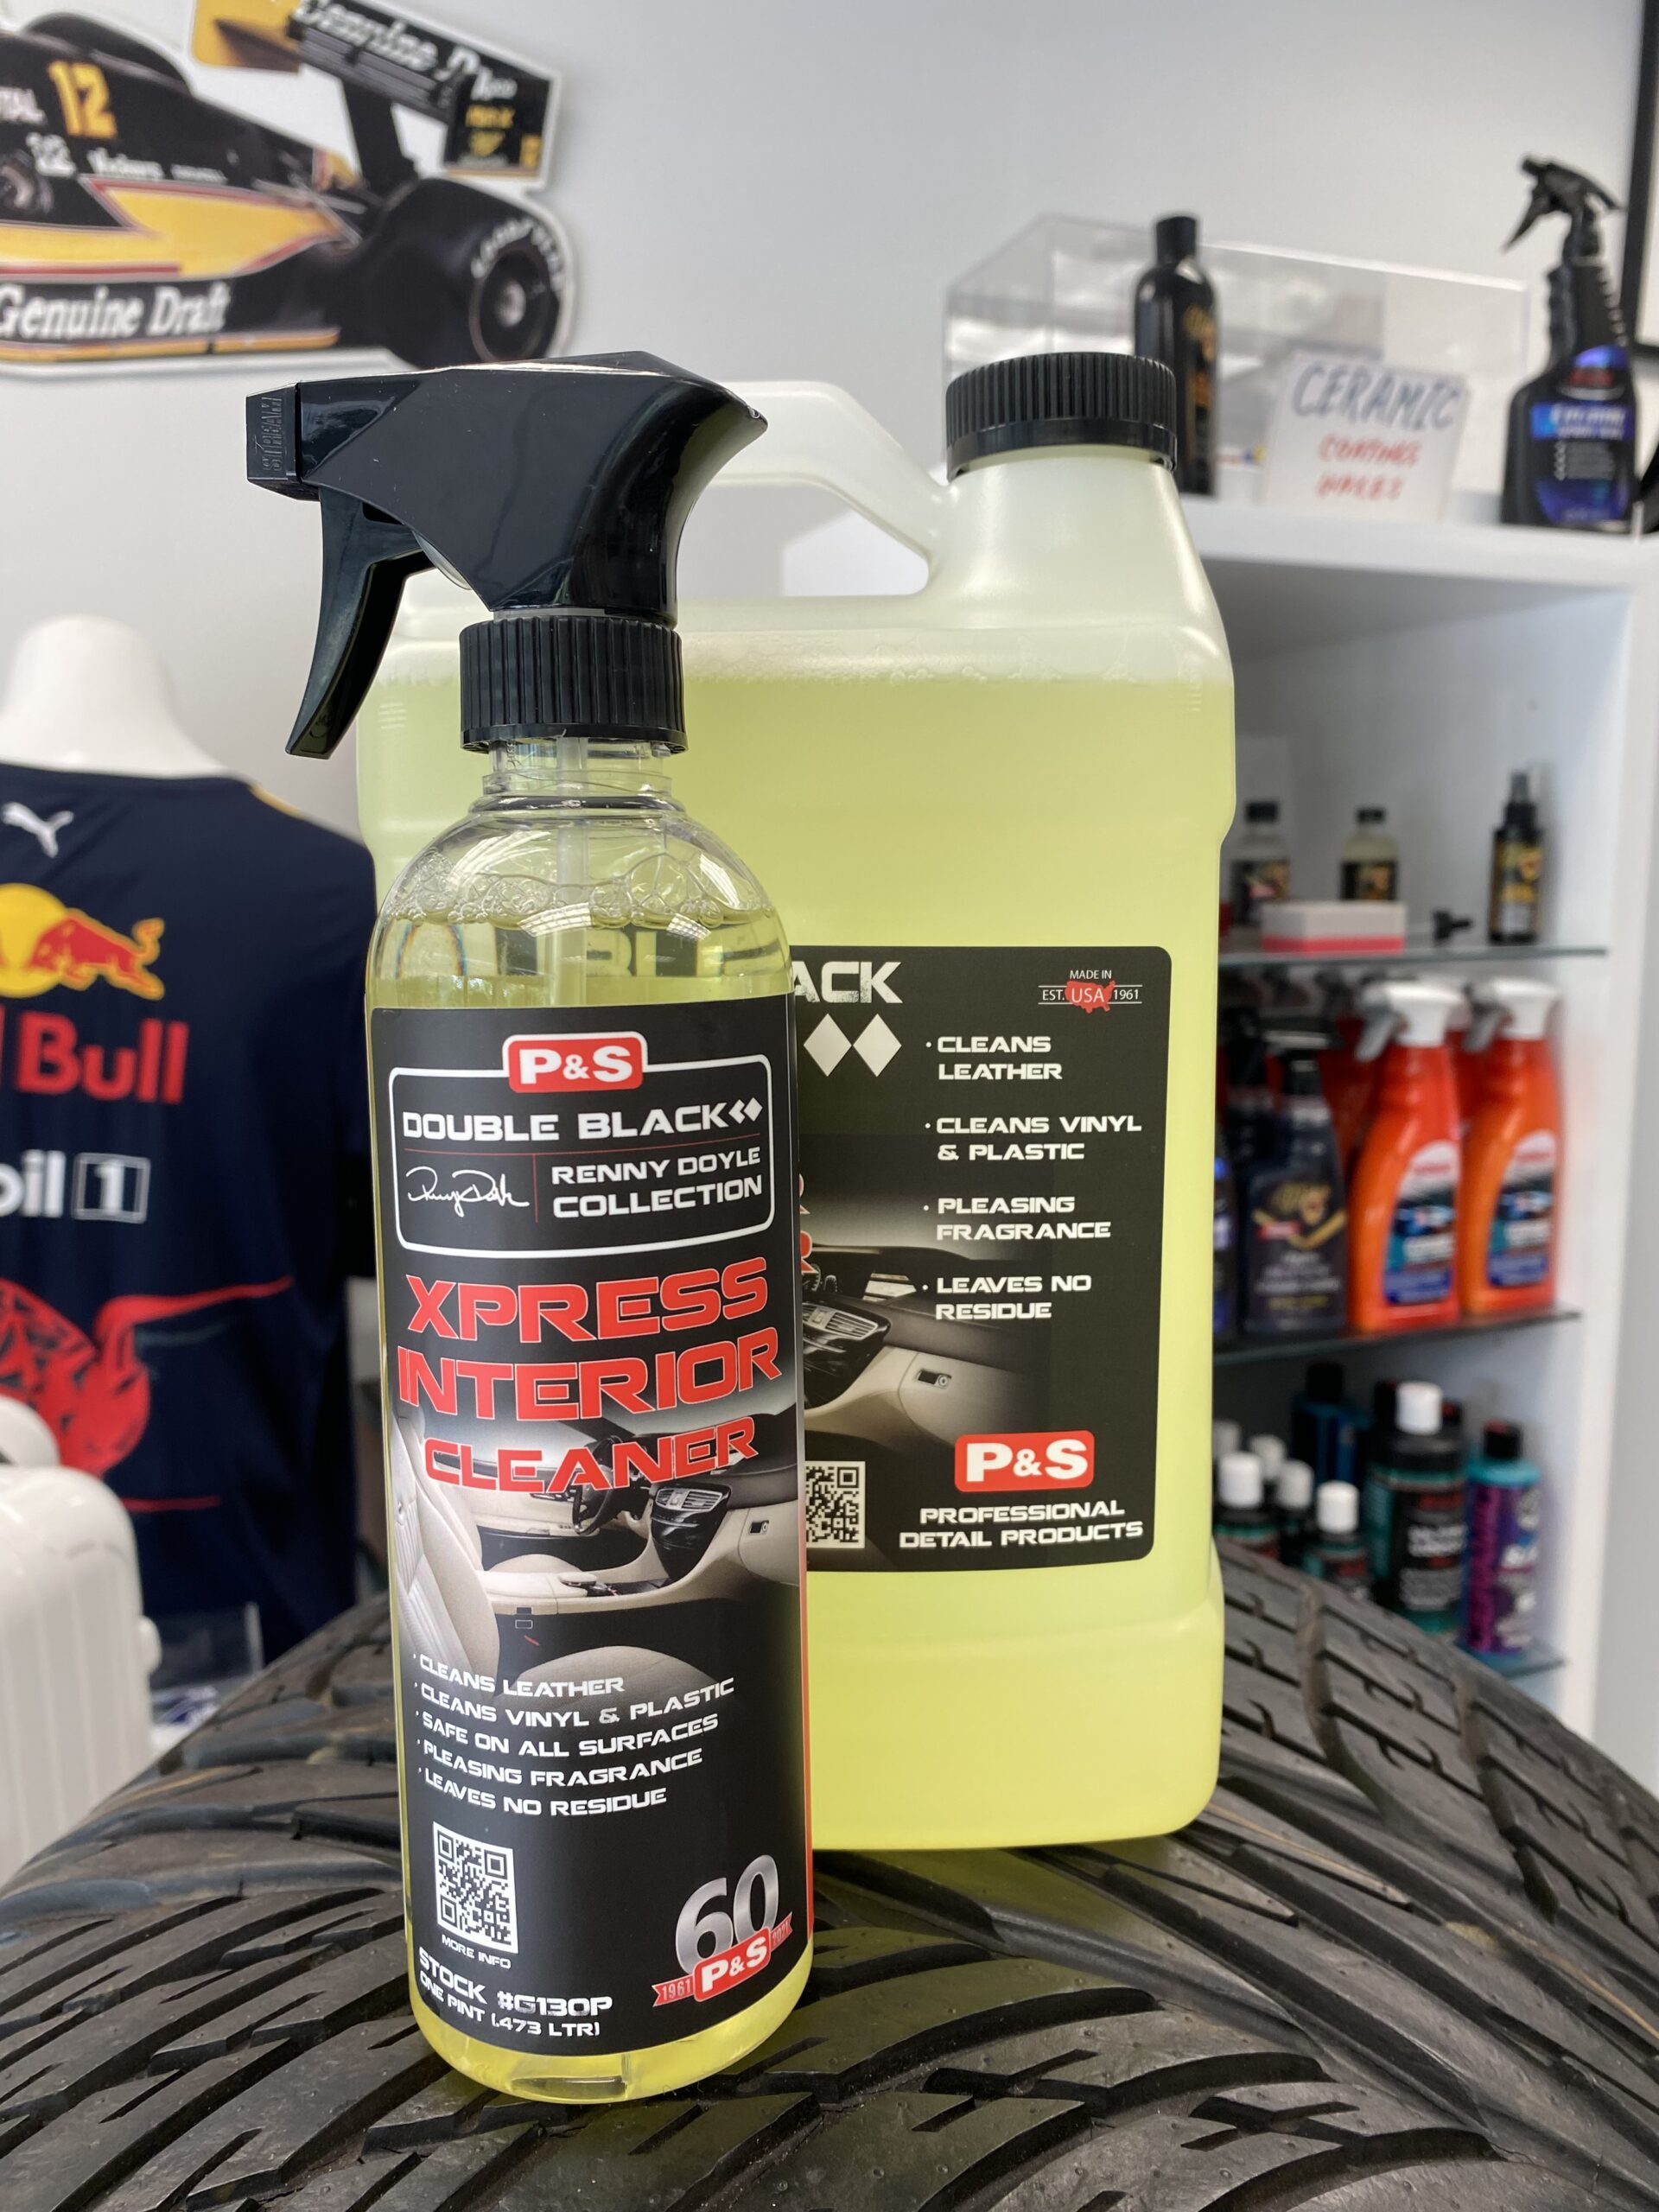 Car Detailing Supplies Selma on Instagram: Perfect for cleaning all  surfaces of the interior of vehicles without the risk of damage. . XPRESS  Interior Cleaner was developed for use on leather, vinyl